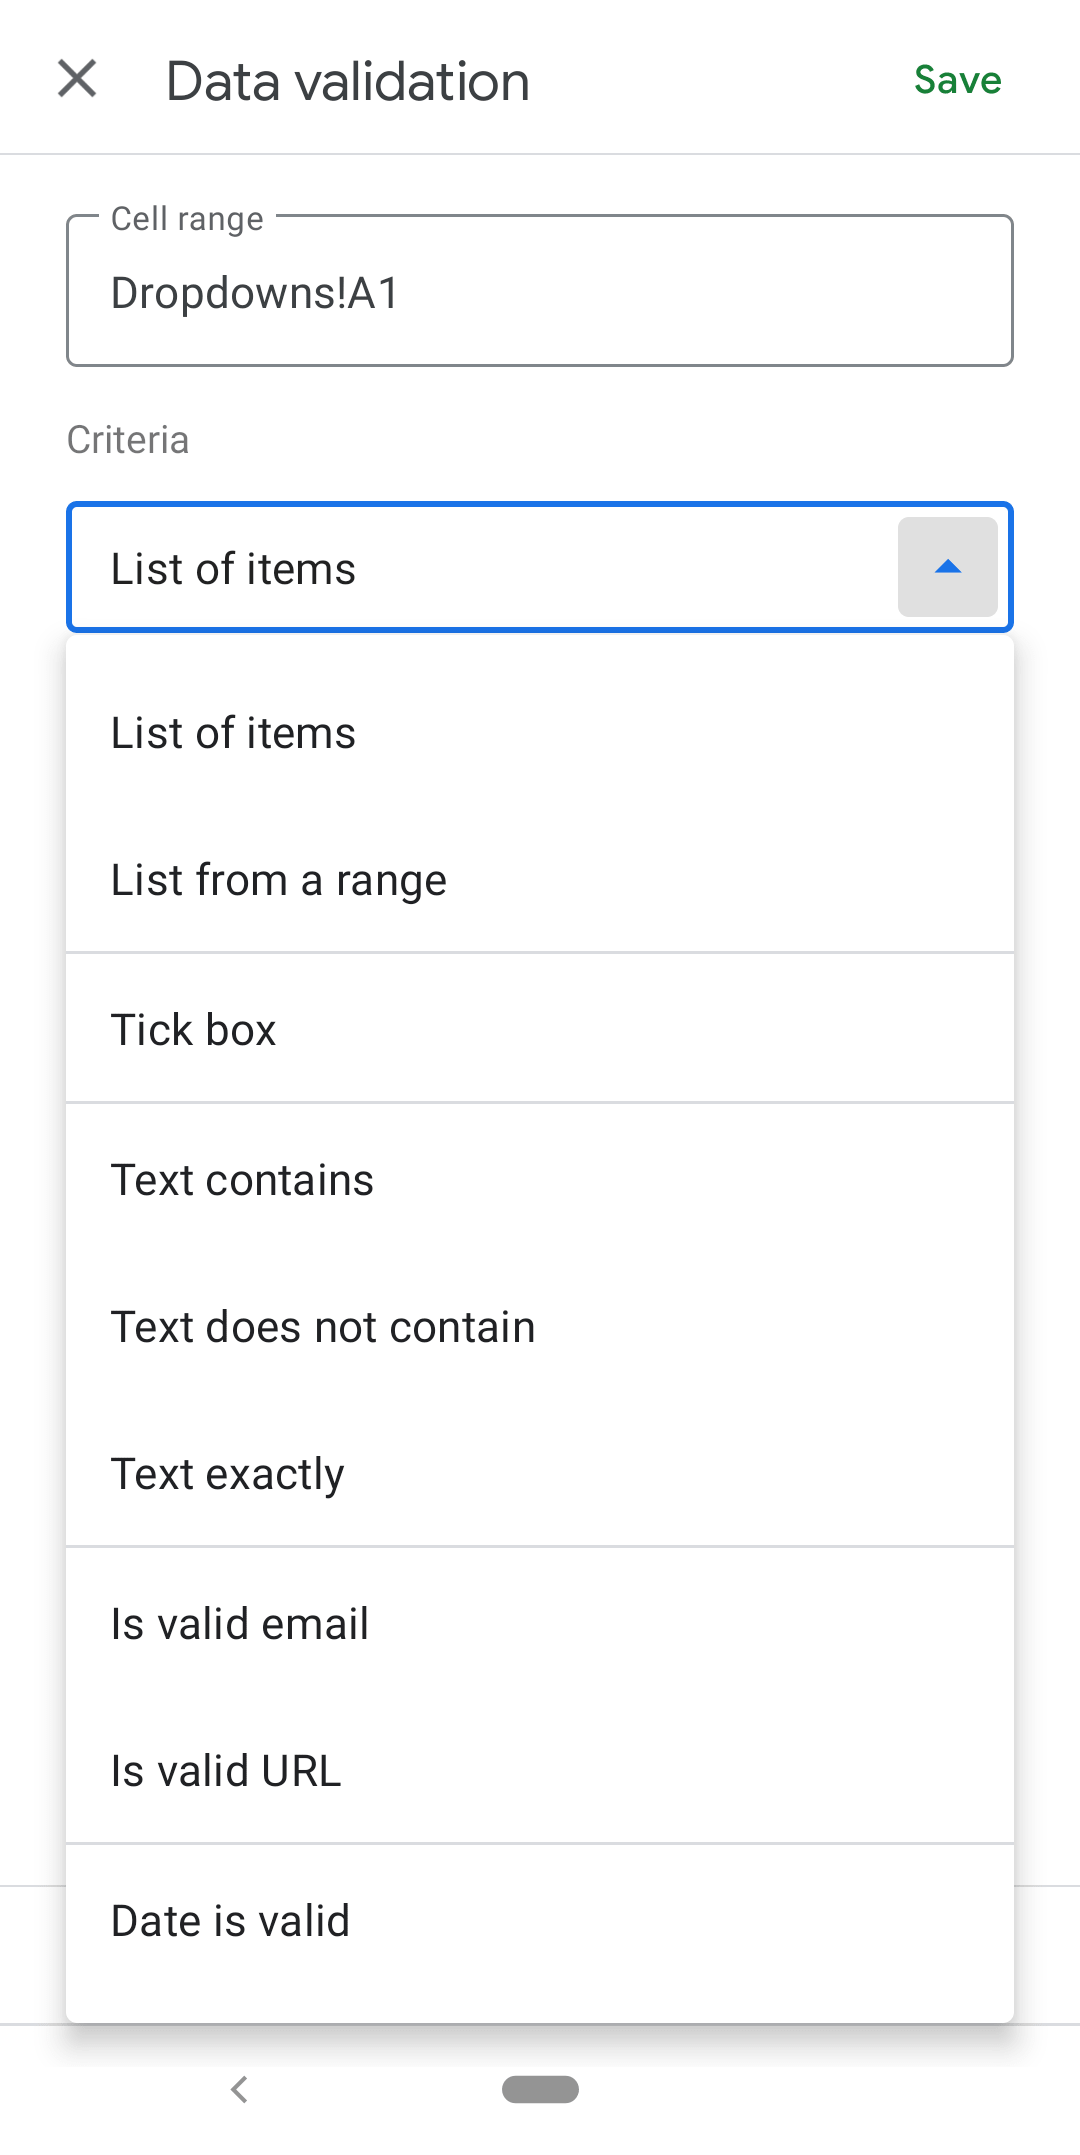 criteria options dropdown in the data validation menu of the android app